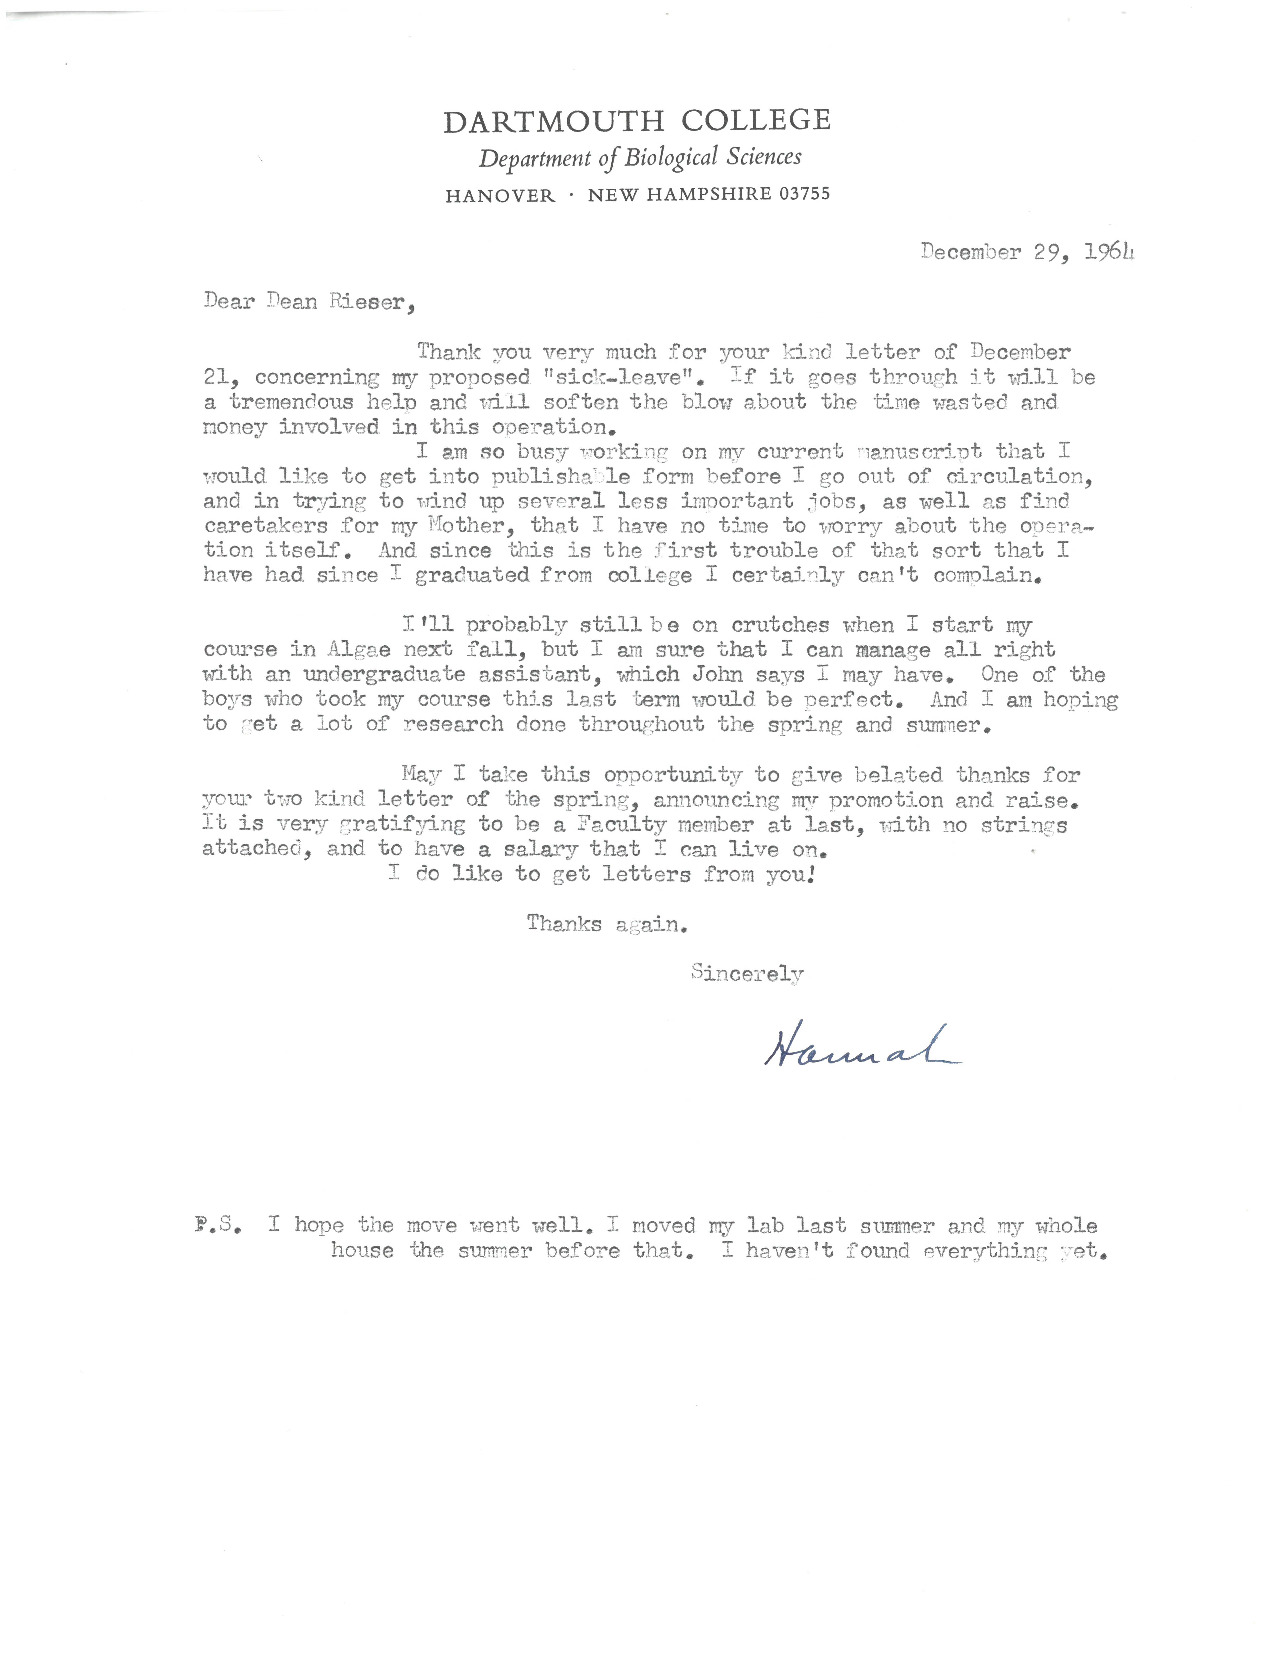 Letter from Hannah Croasdale to Leonard Rieser, Dec. 29, 1964